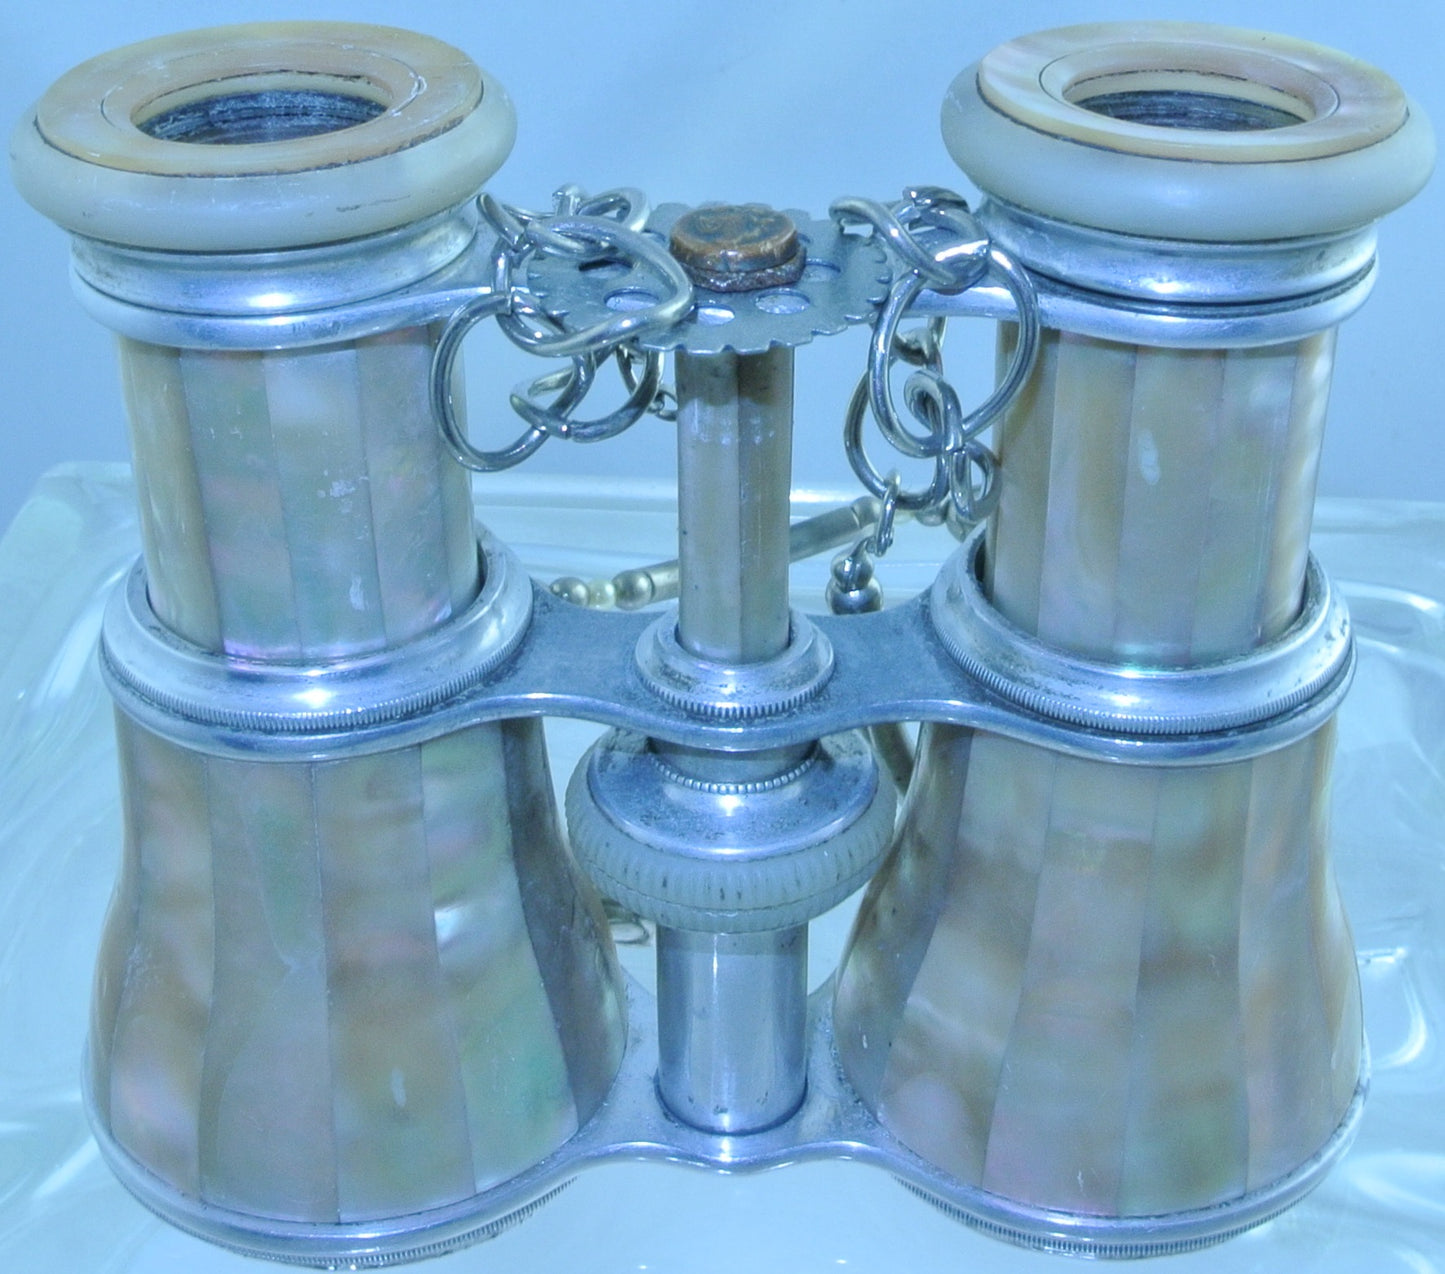 VINTAGE MOTHER OF PEARL MOP ABALONE LEMAIRE DOUBLE WALLED CASED BINOCULARS POSSIBLY OWNED BY GABRIELLE FLAMMARION SILVER ROUND WATCH CLOCK GEAR SILVER CHAIN CLASP OPERA GLASSES STARR WILDE STEAMPUNK FORTRESS